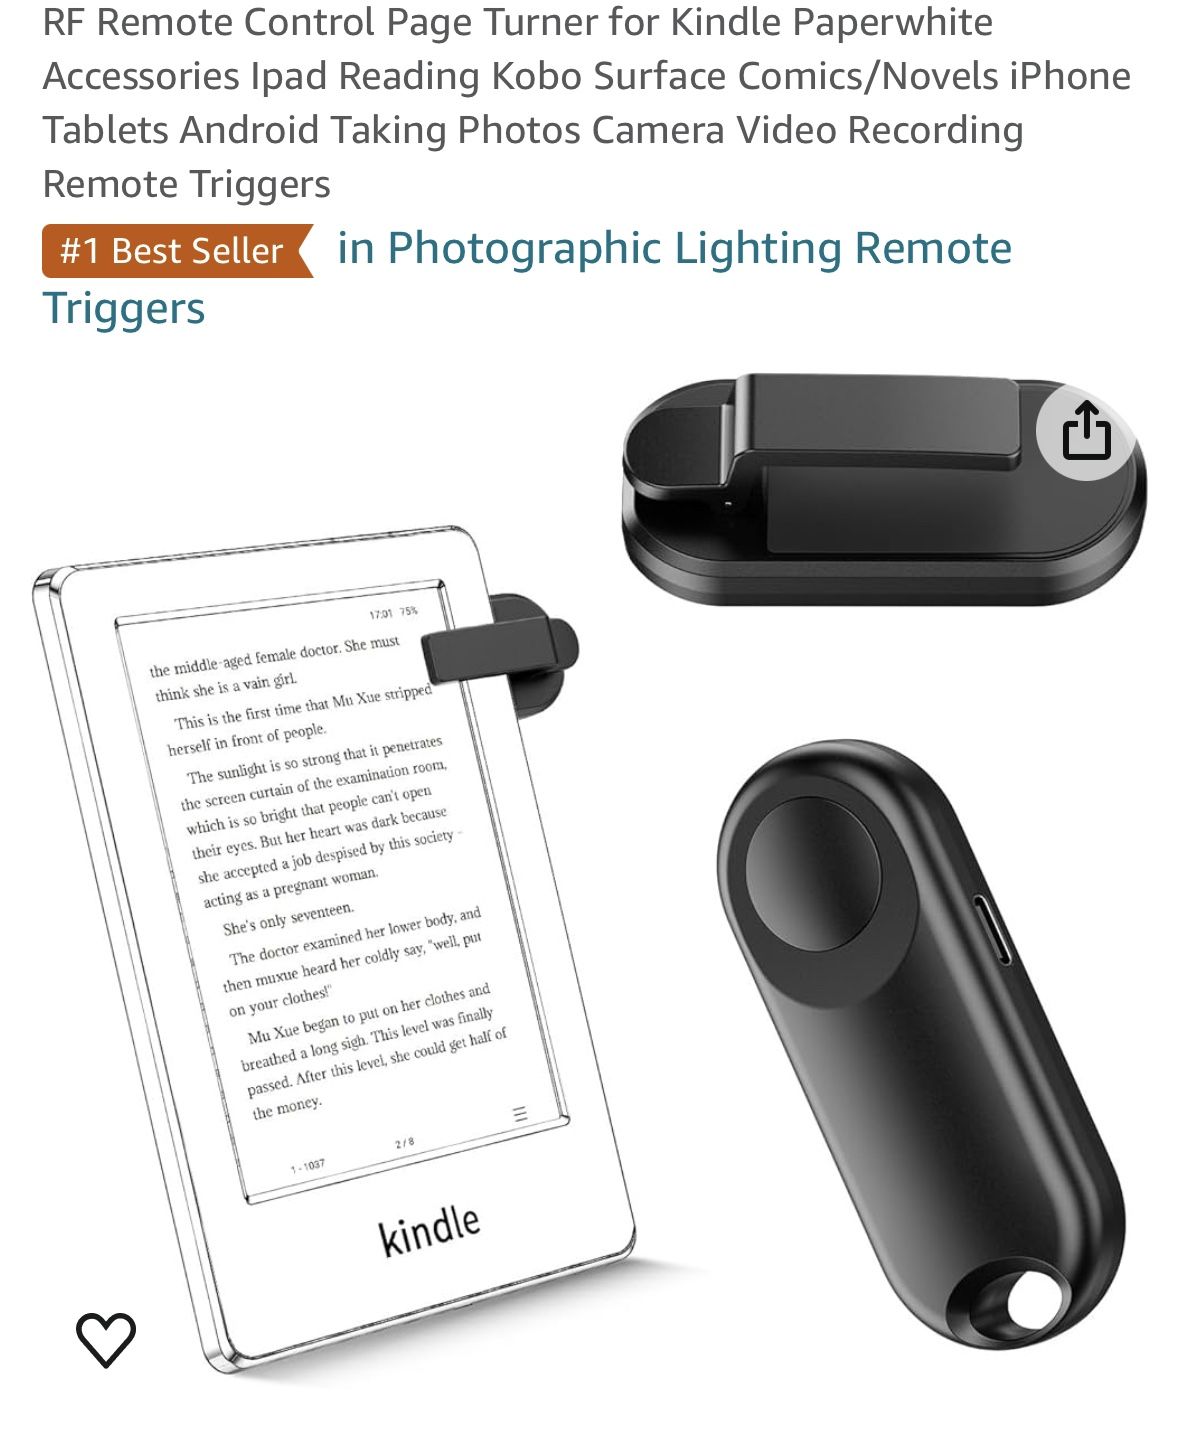 Remote Control Page Turner For Kindle Paperwhite